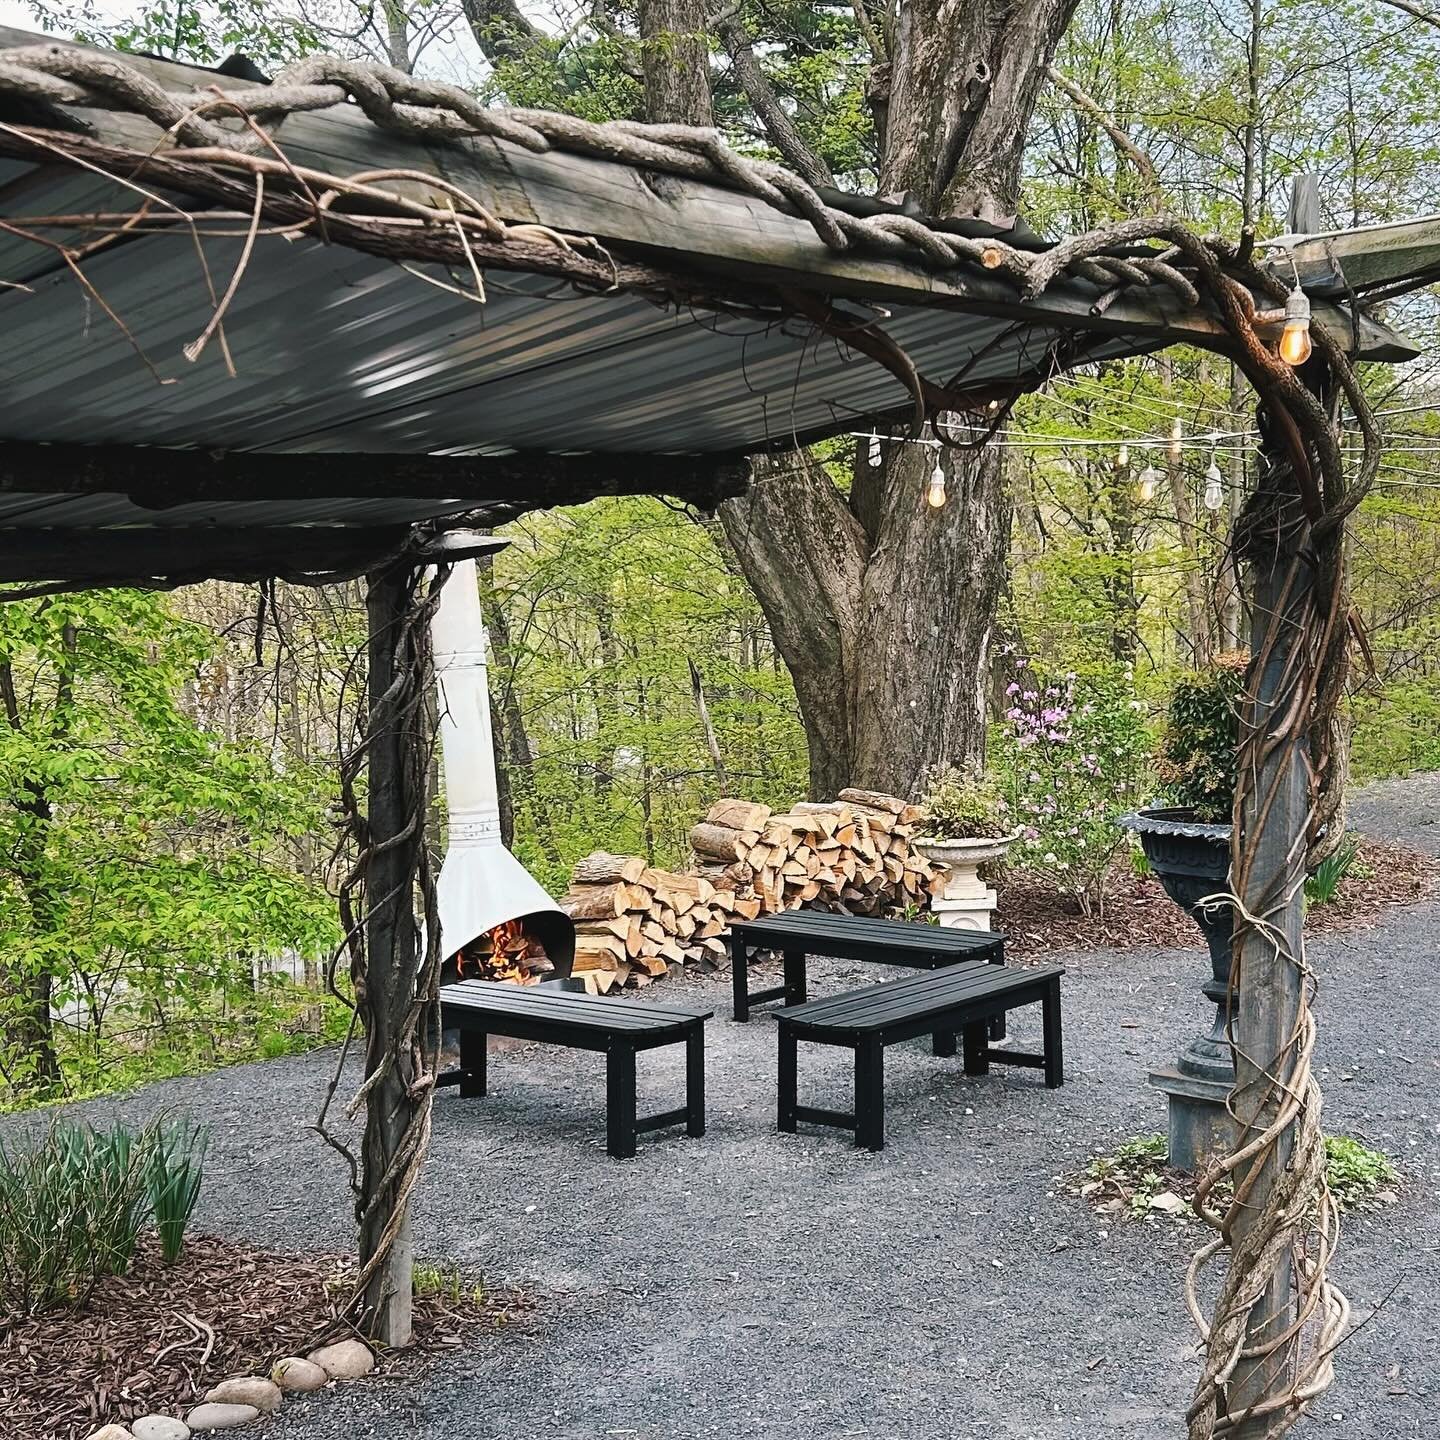 A couple of favorite spots to take a cocktail in the garden courtyard. Join us Sunday &amp; Monday from 4pm for drinks and a bite.
.
.
.
#foxfiremountainhouse #catskillsny #catskillsrestaurant #catskillscocktails #outdoorfireplace